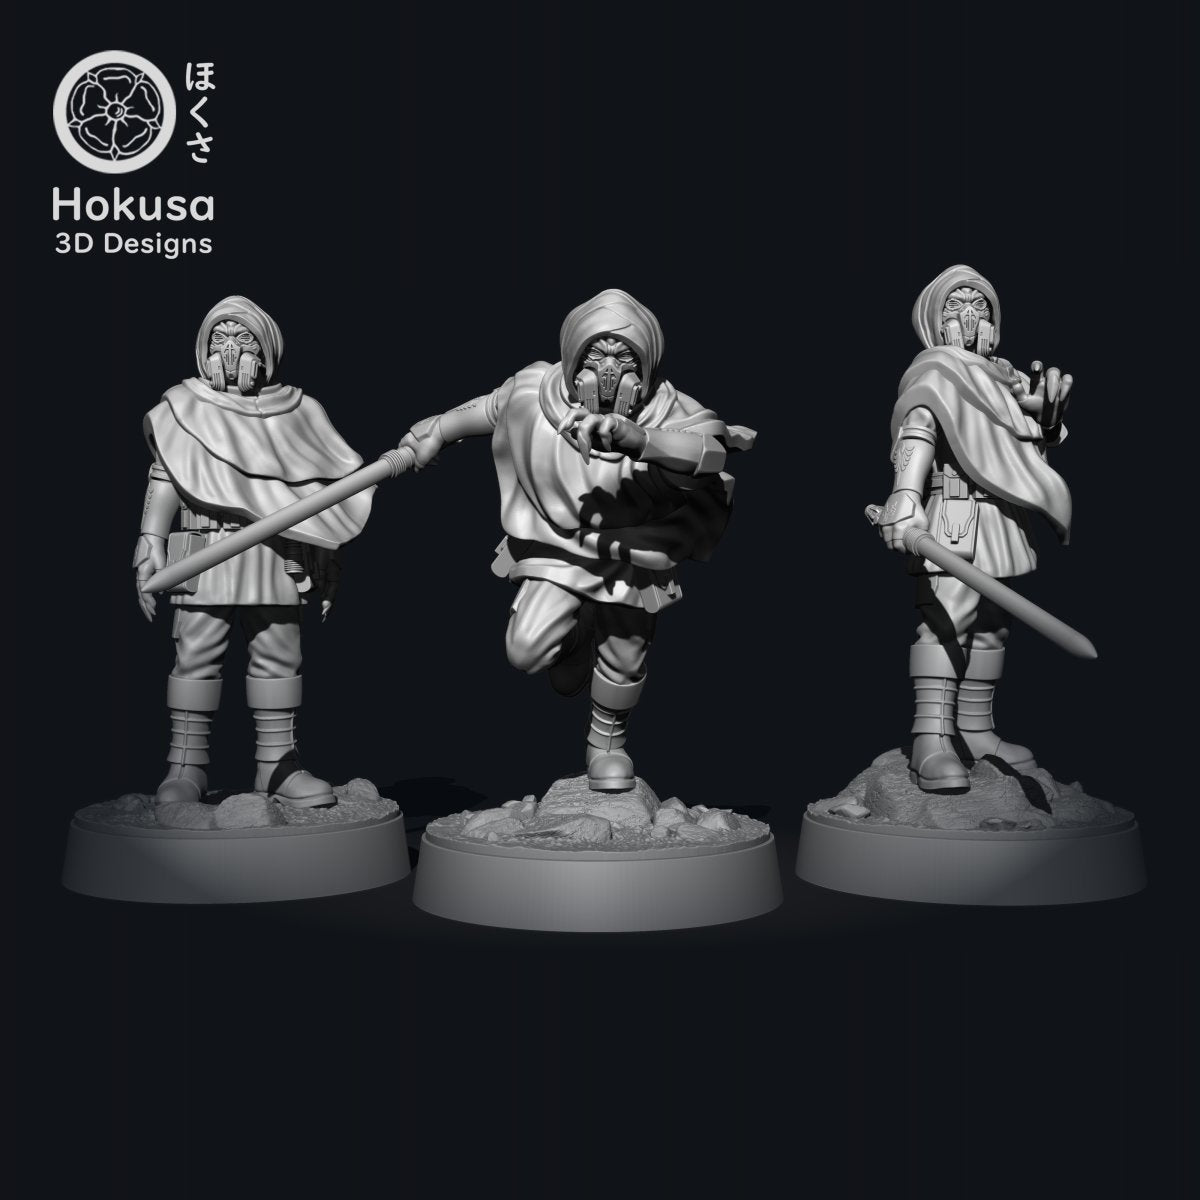 The Masked General - Single Miniature - SW Legion Compatible (38-40mm tall) Resin 3D Print - Hokusa Designs - Gootzy Gaming